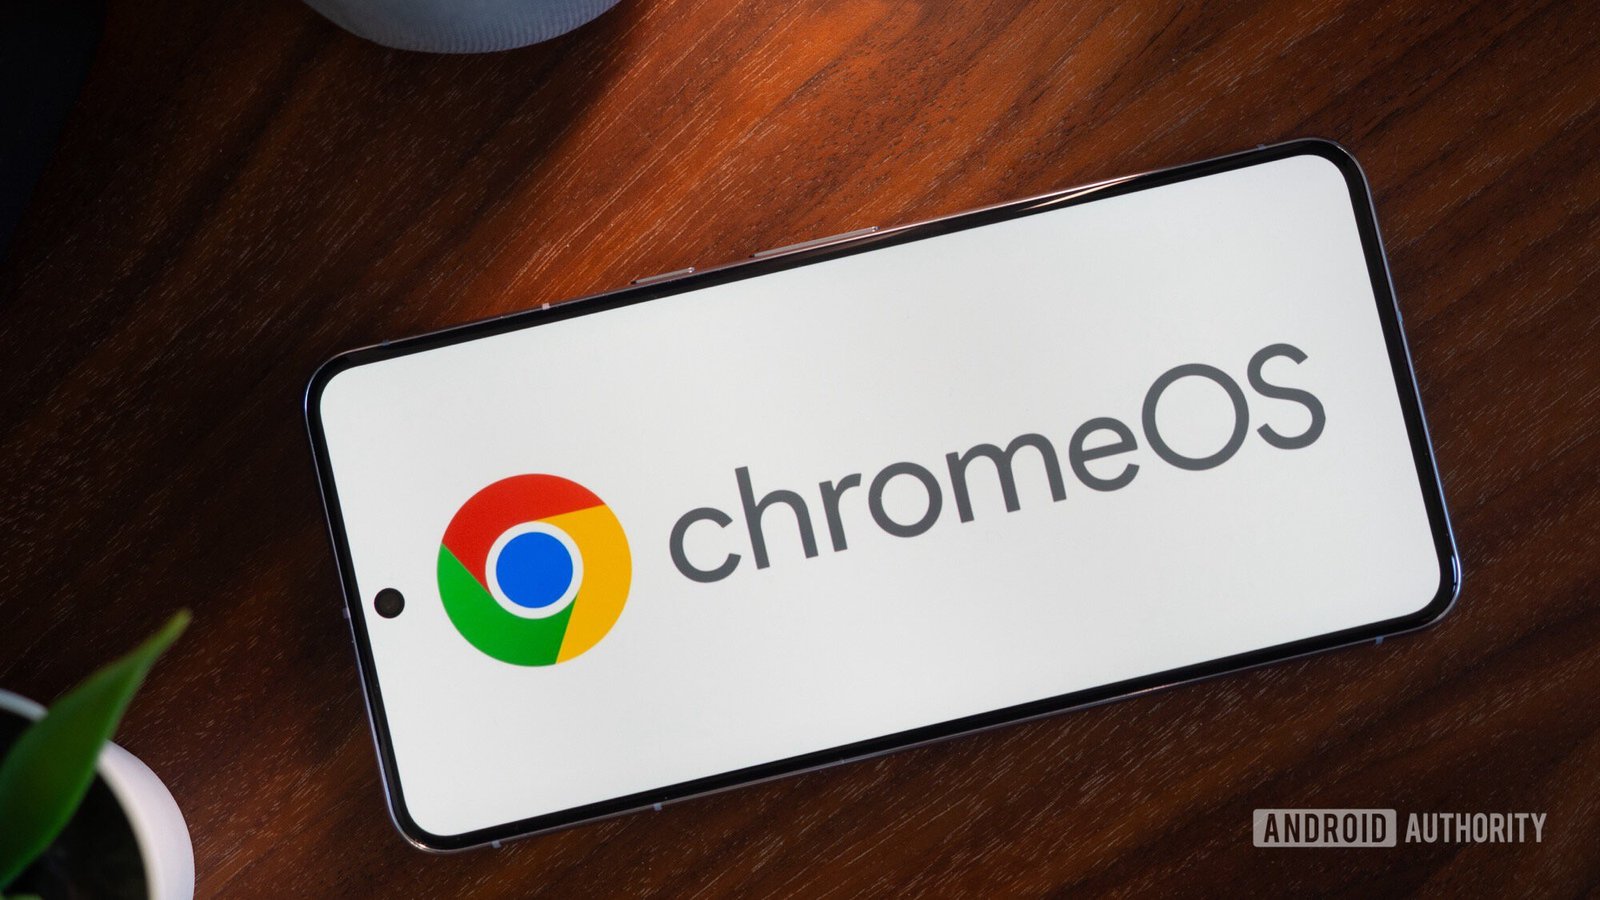 Google is making Chrome OS more like Android to deliver more AI features